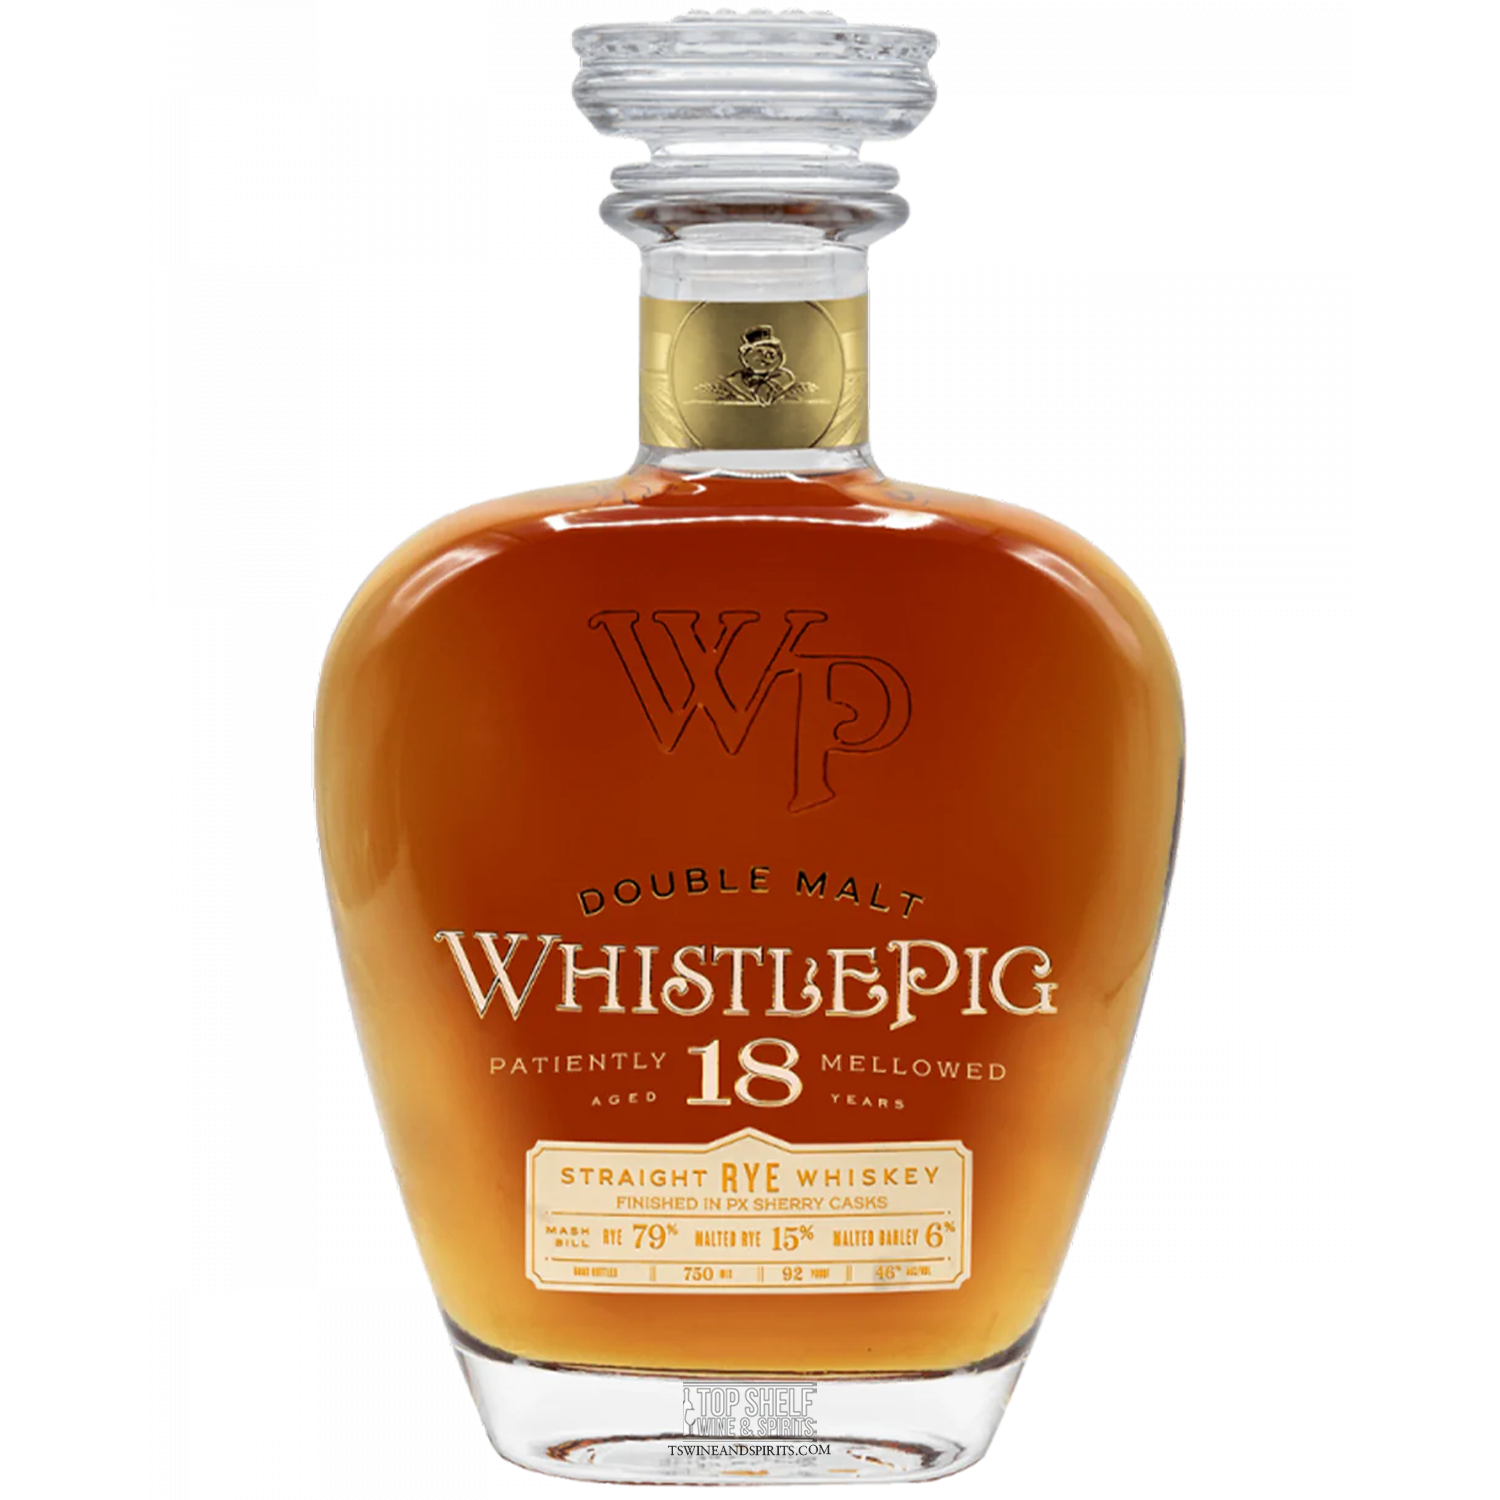 WhistlePig Double Malt 18 Year Old Straight Rye Whiskey (Old Bottle)